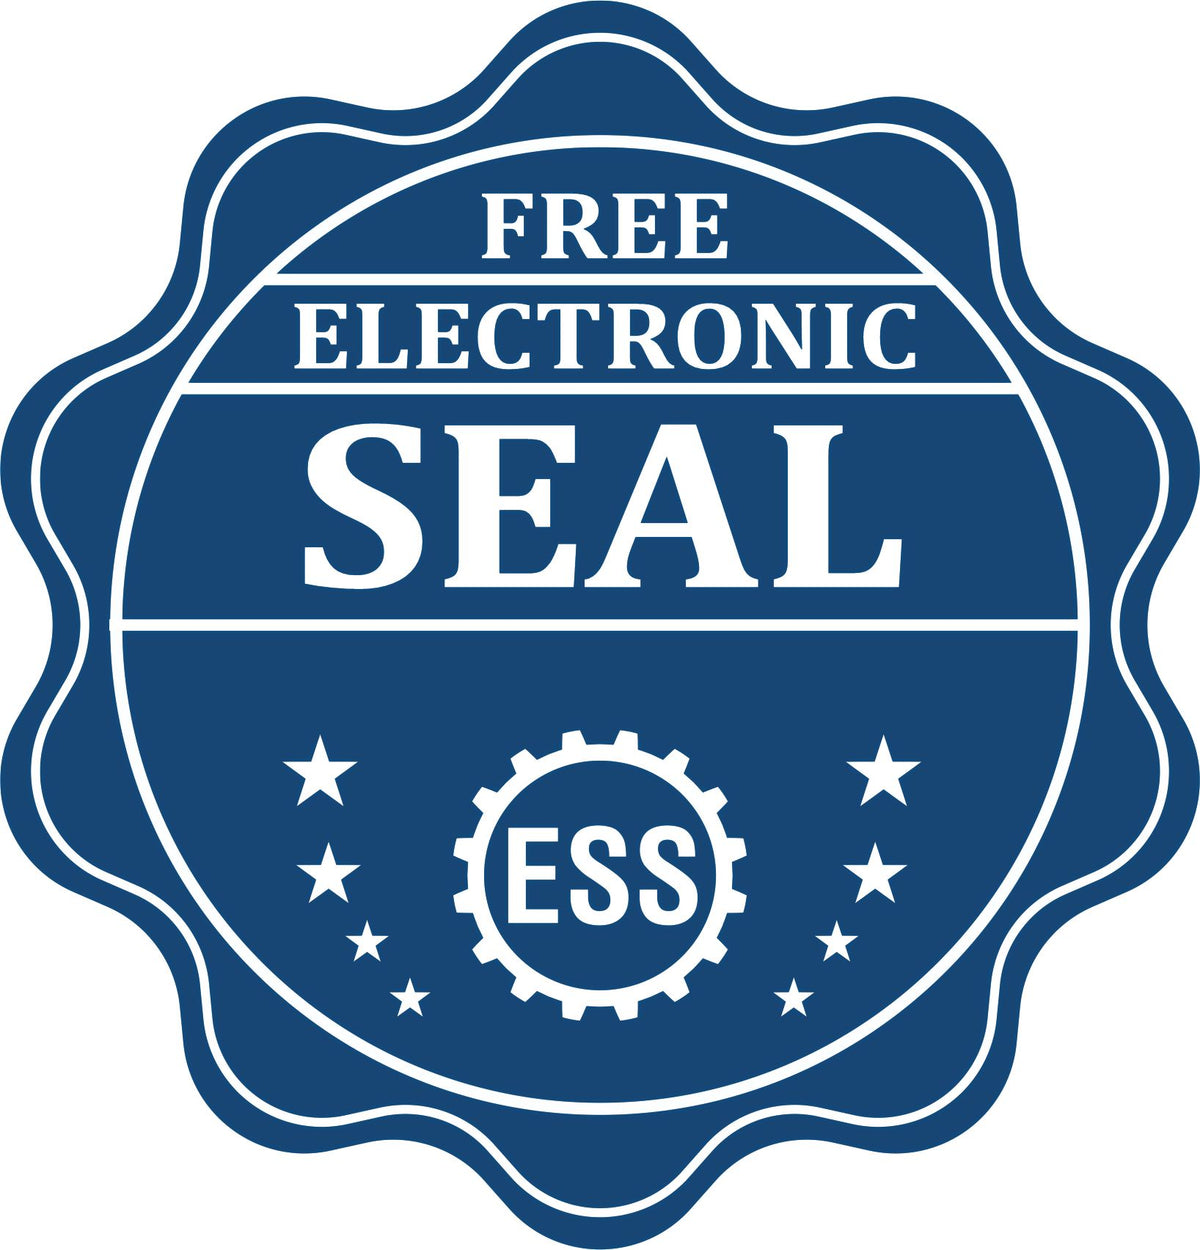 A badge showing a free electronic seal for the Soft Michigan Professional Geologist Seal with stars and the ESS gear on the emblem.